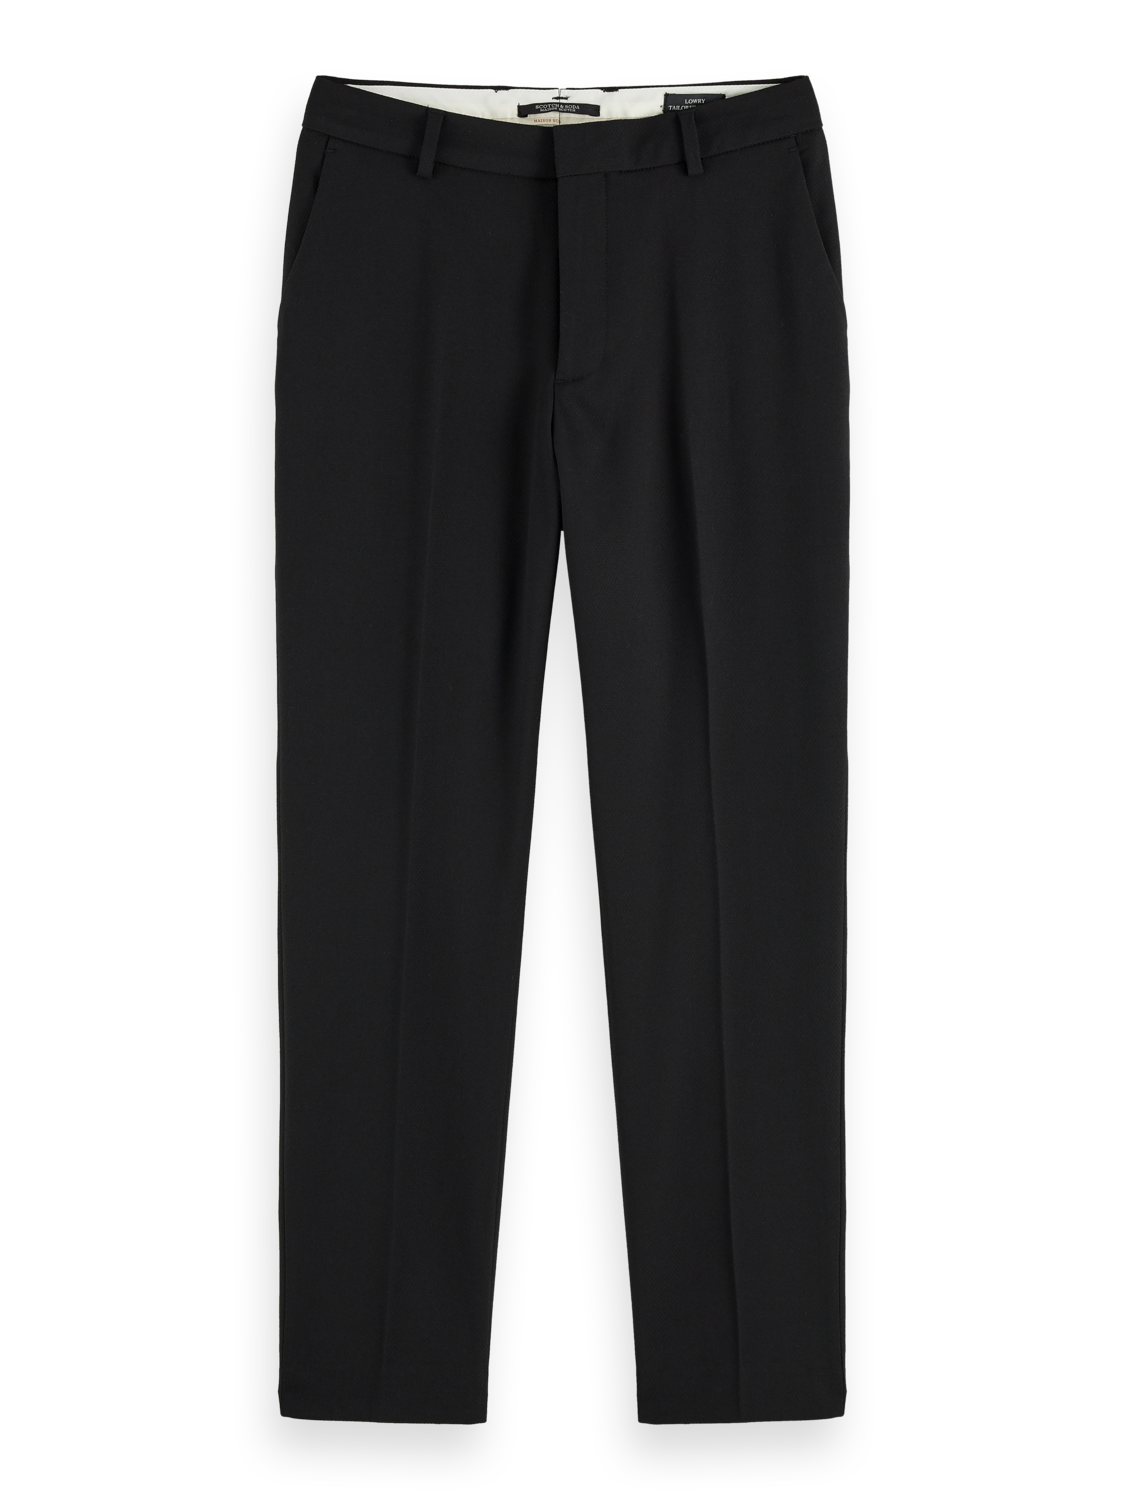 Lowry' Tailored slim fit classic pants - Brave